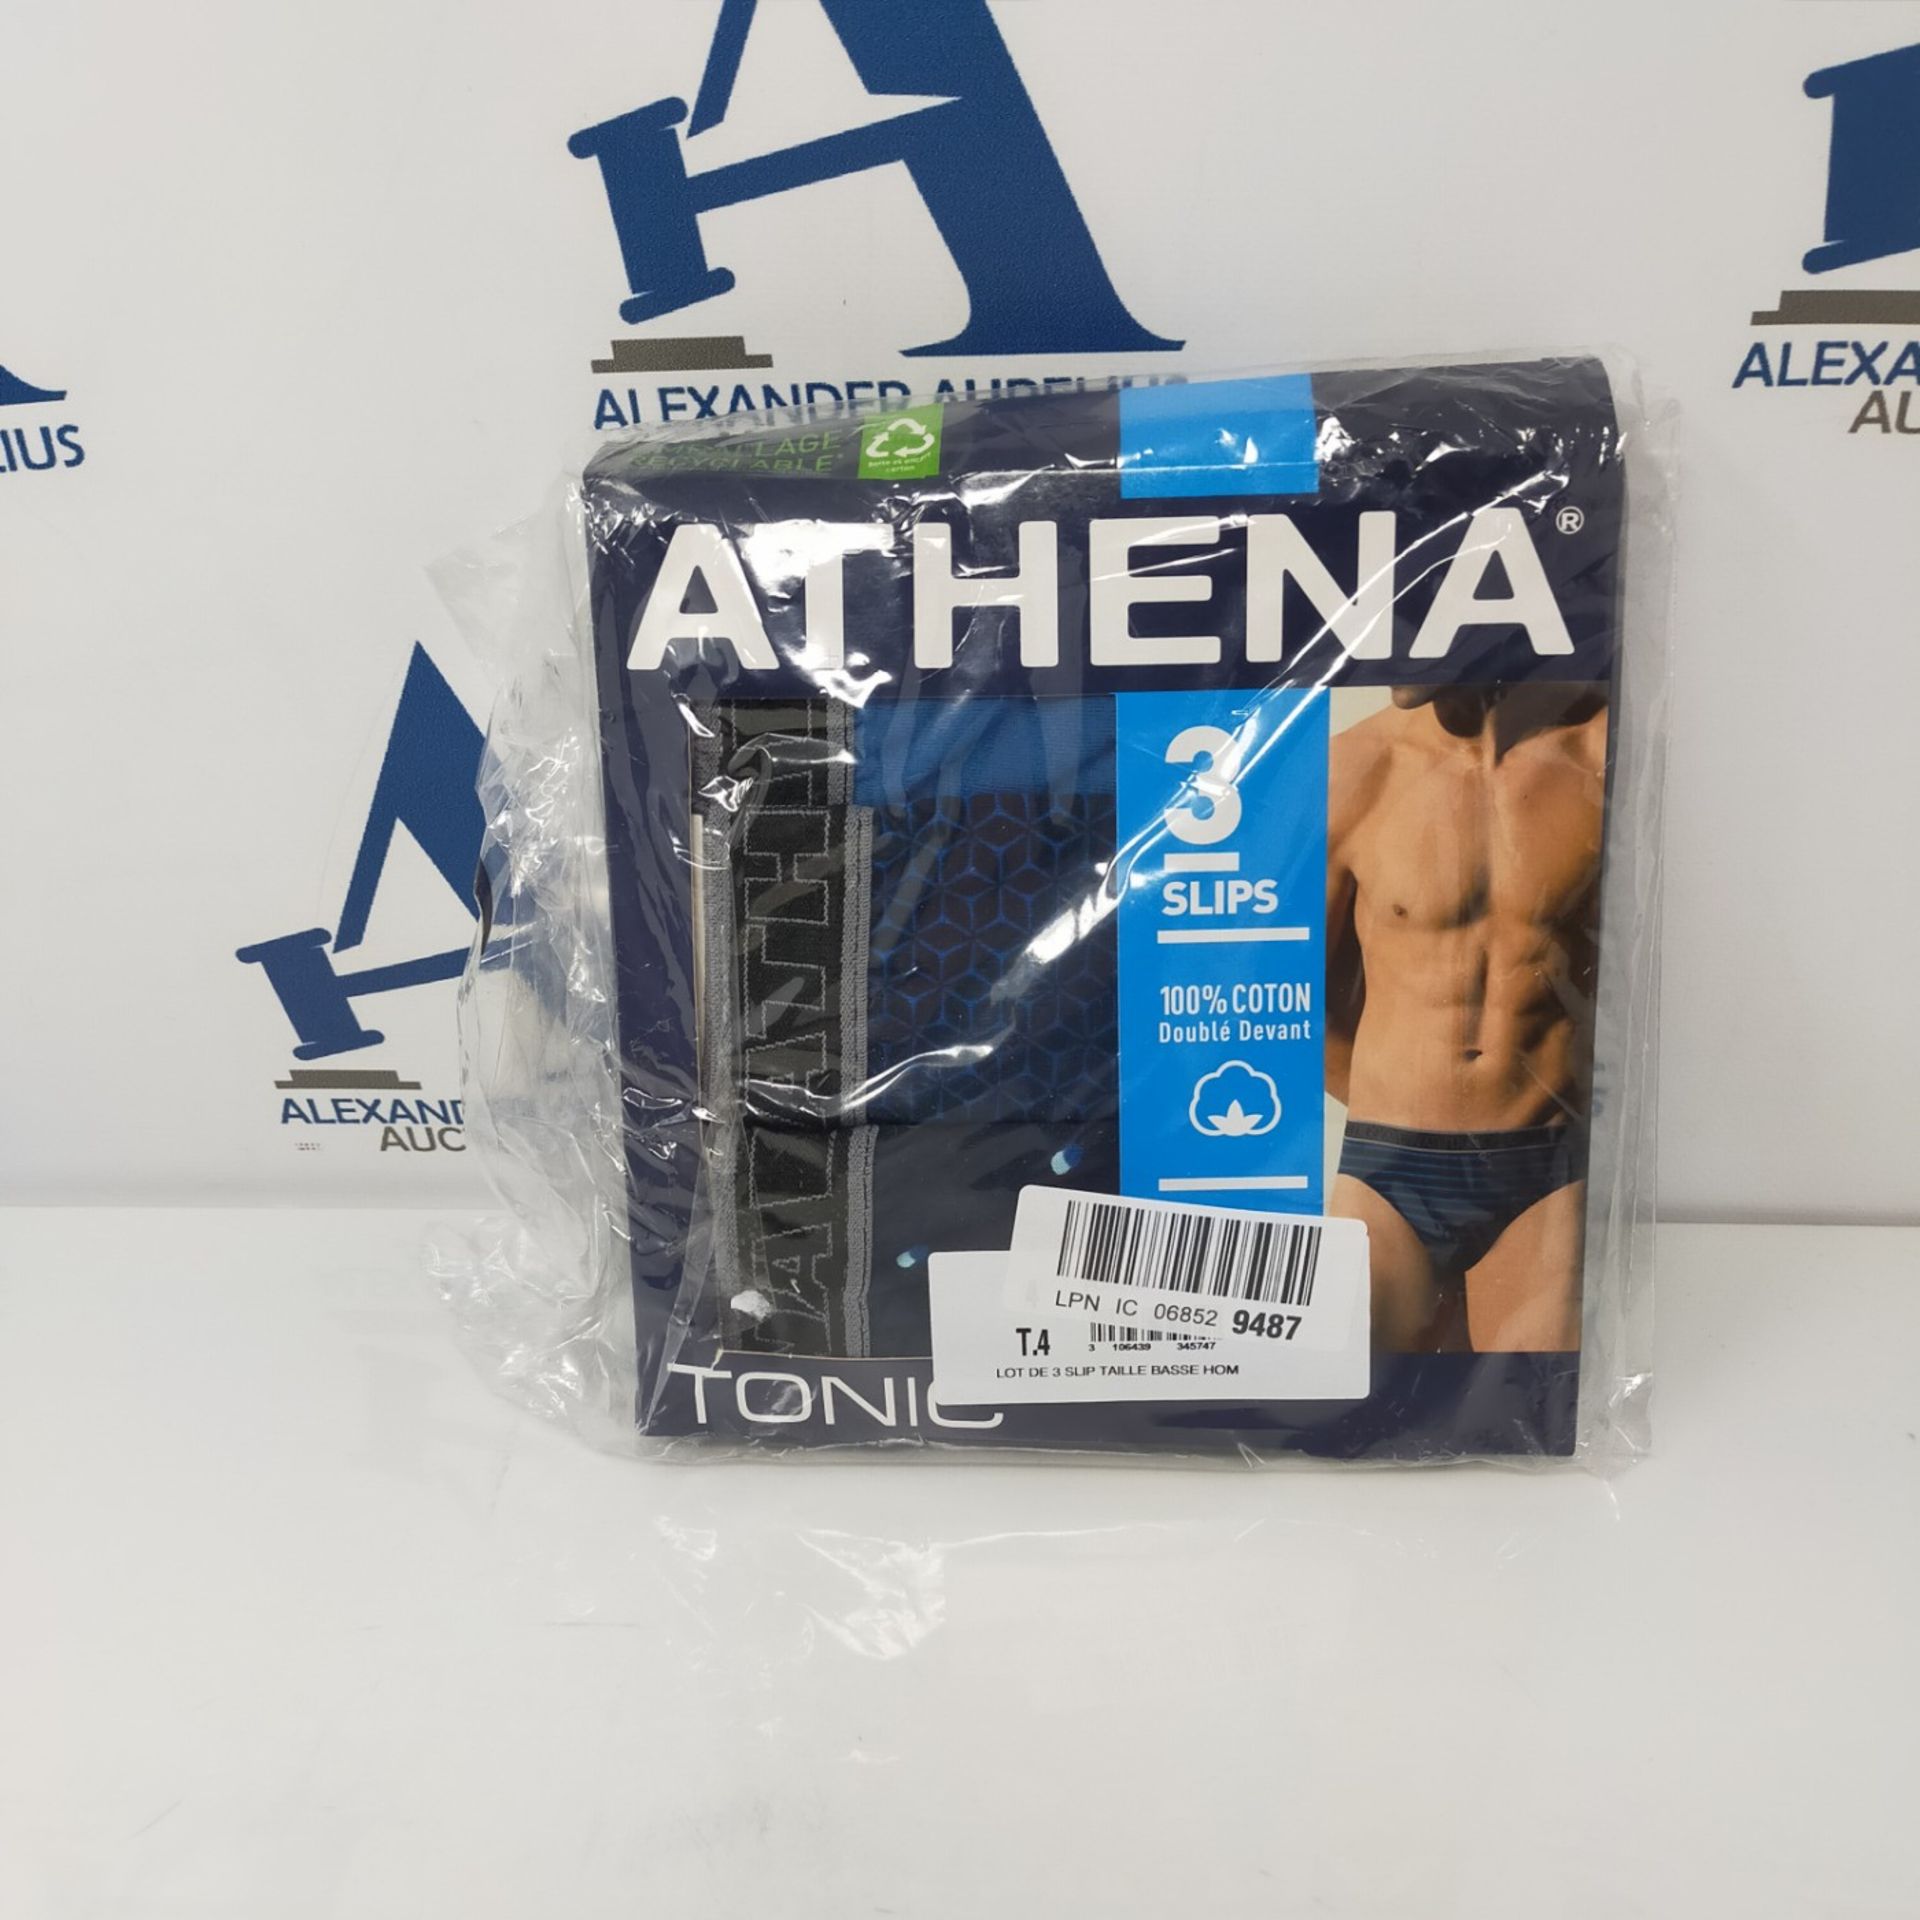 Athena Men's Tonic Knickers, (Pois/Mozaique/Bleu 1920), Large (Size: 4) (Pack of 3) - Image 2 of 2